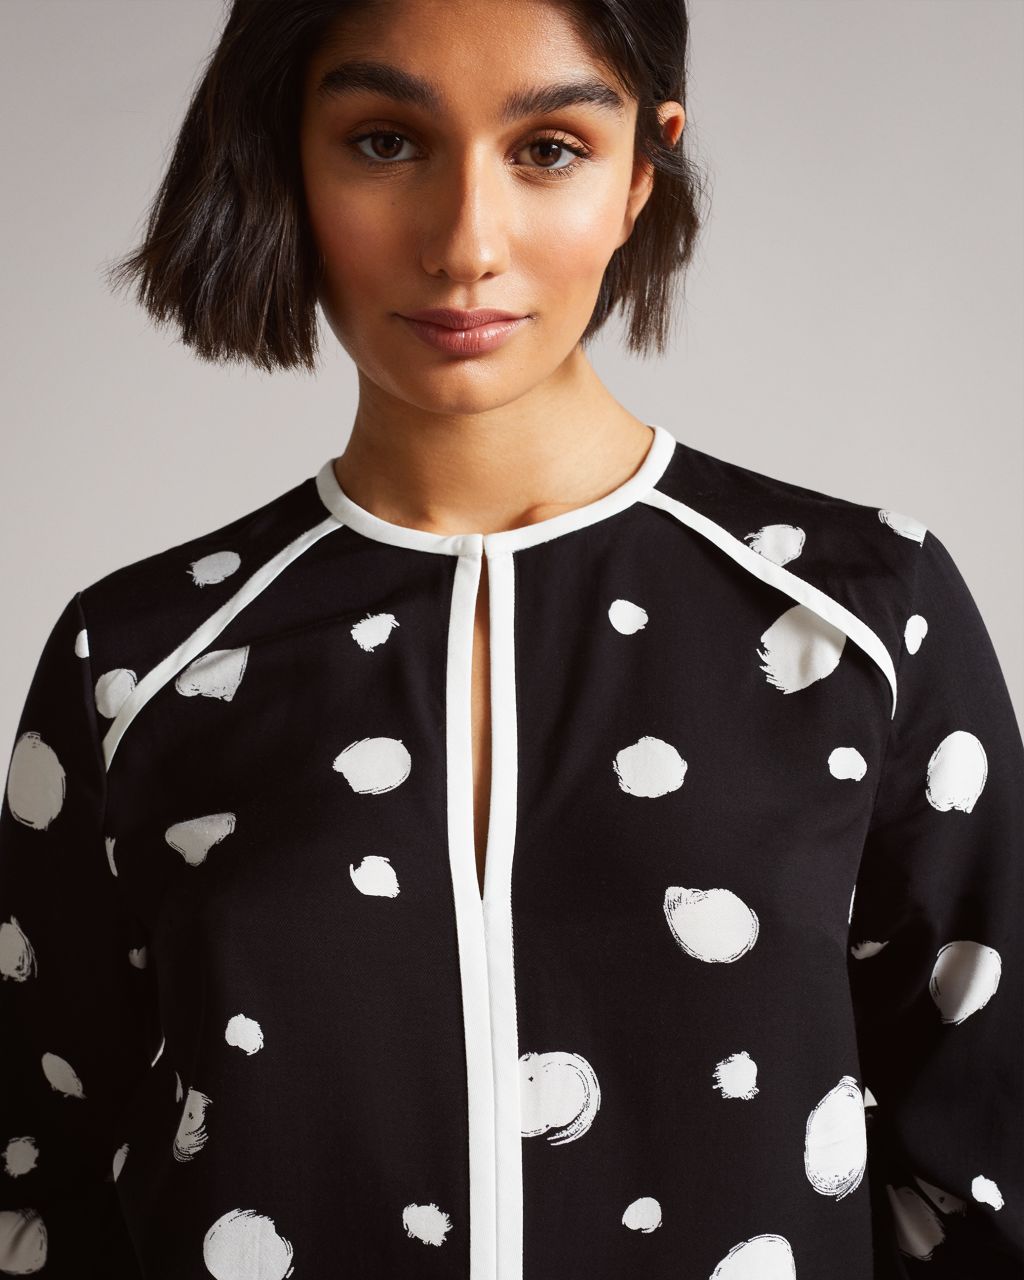 Spot Print Top With Contrast Binding